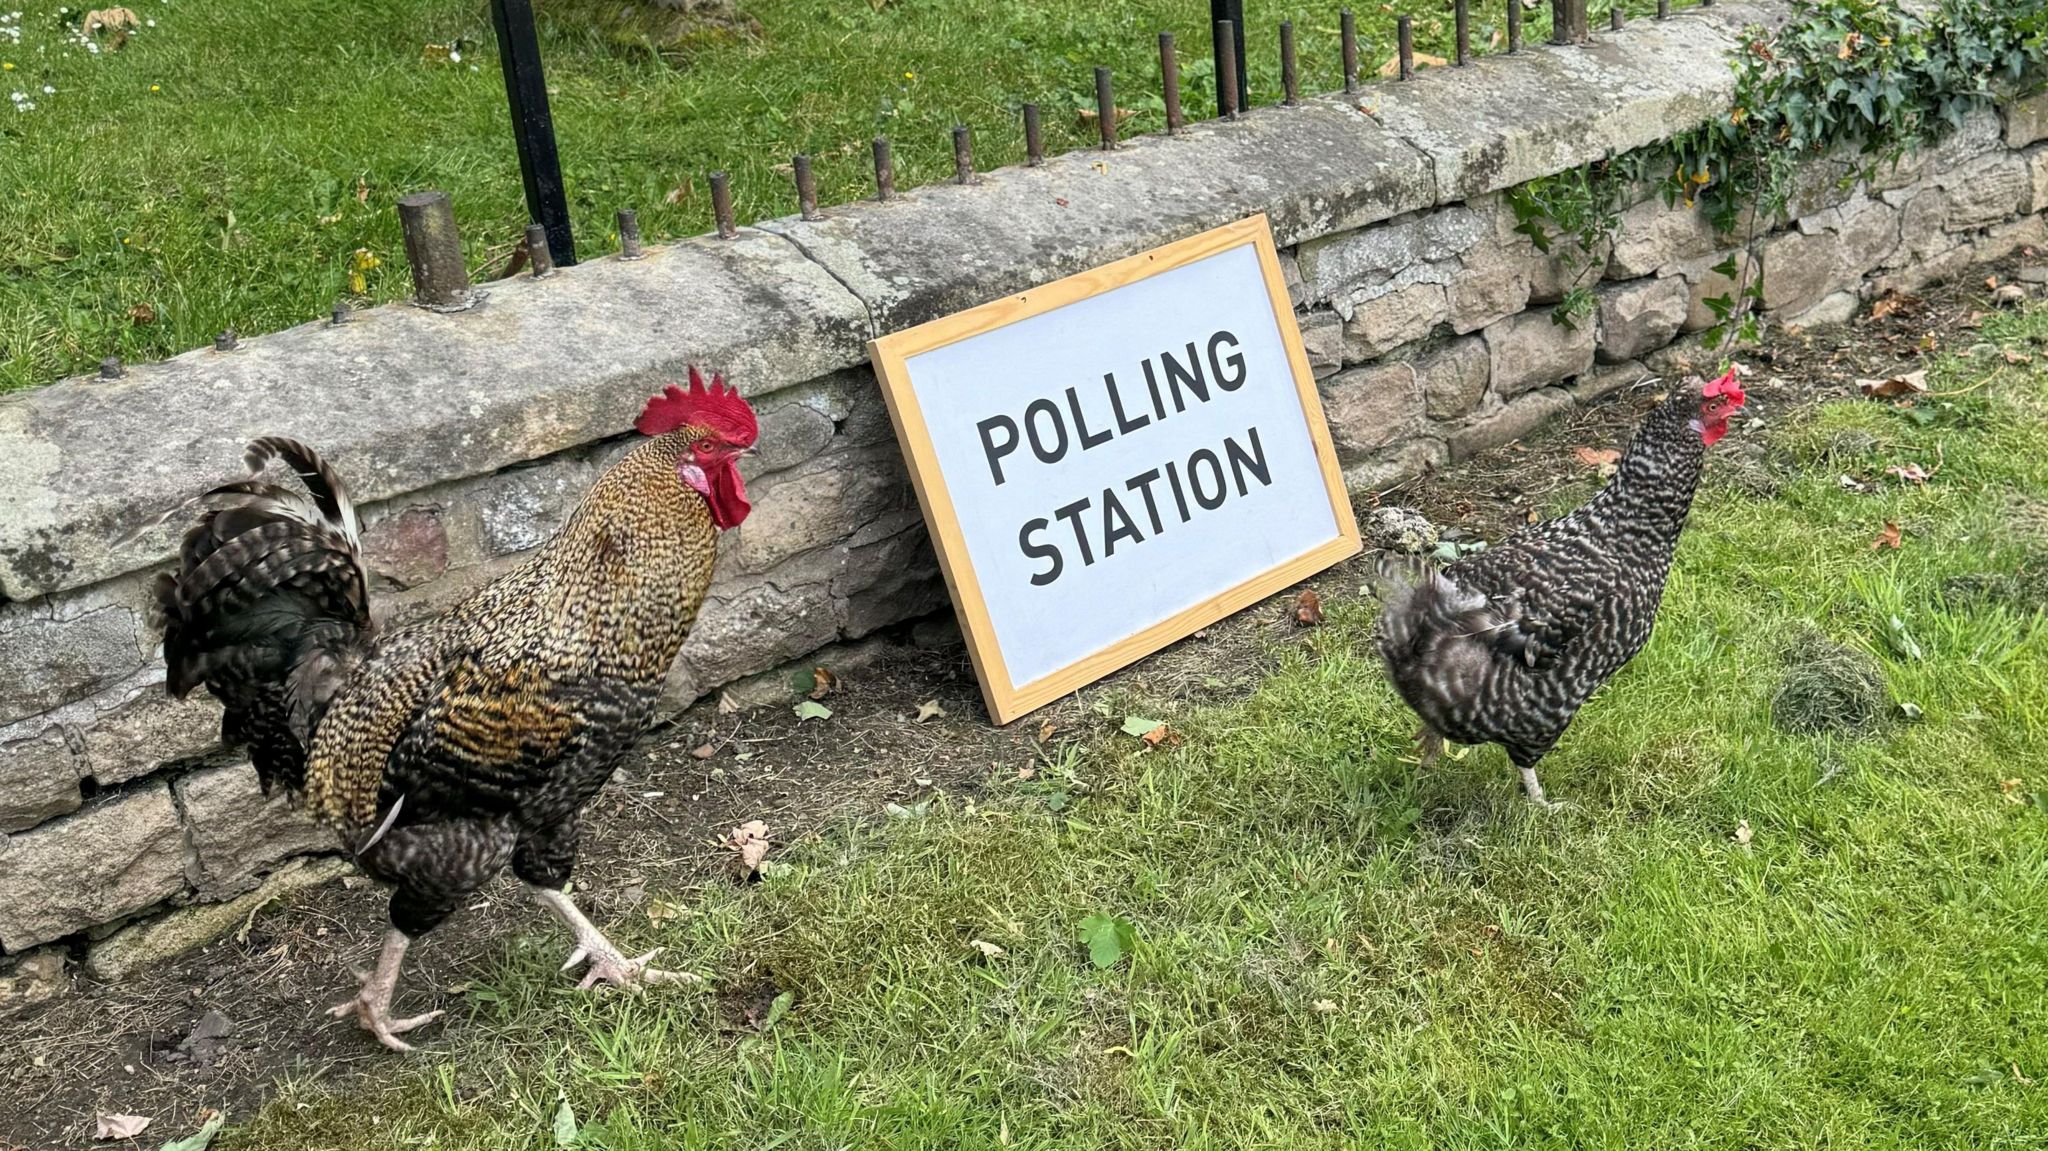 Two chickens walking either side of a polling station sign.